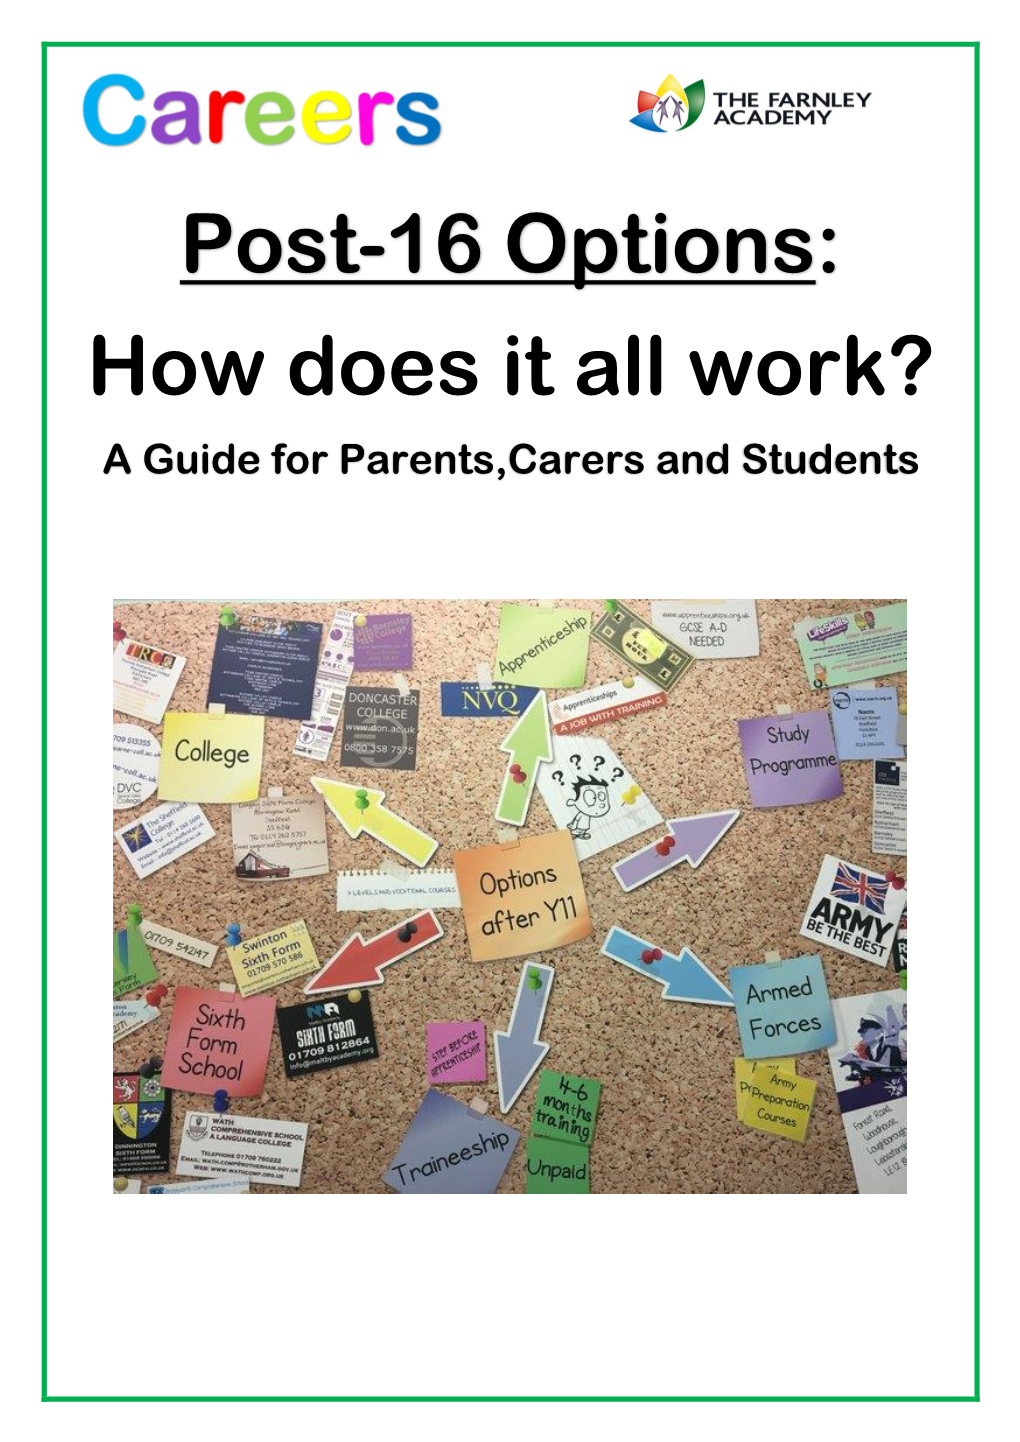 Post-16 Options: How Does It All Work?